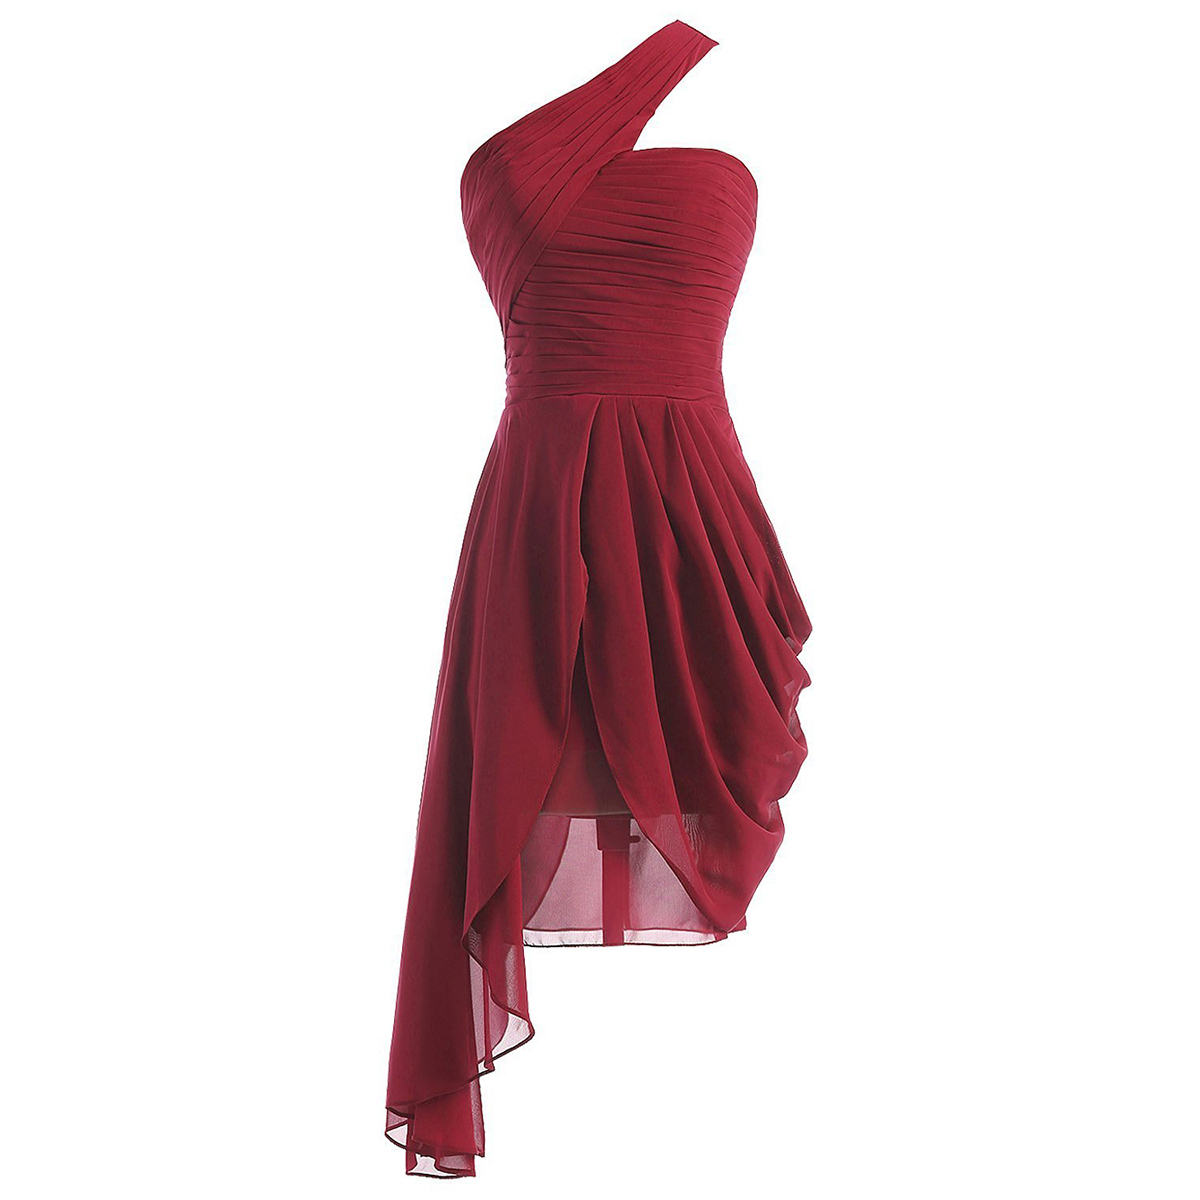 Burgundy Short Bridesmaid Dresses With Ruffles, A-line One Shoulder ...